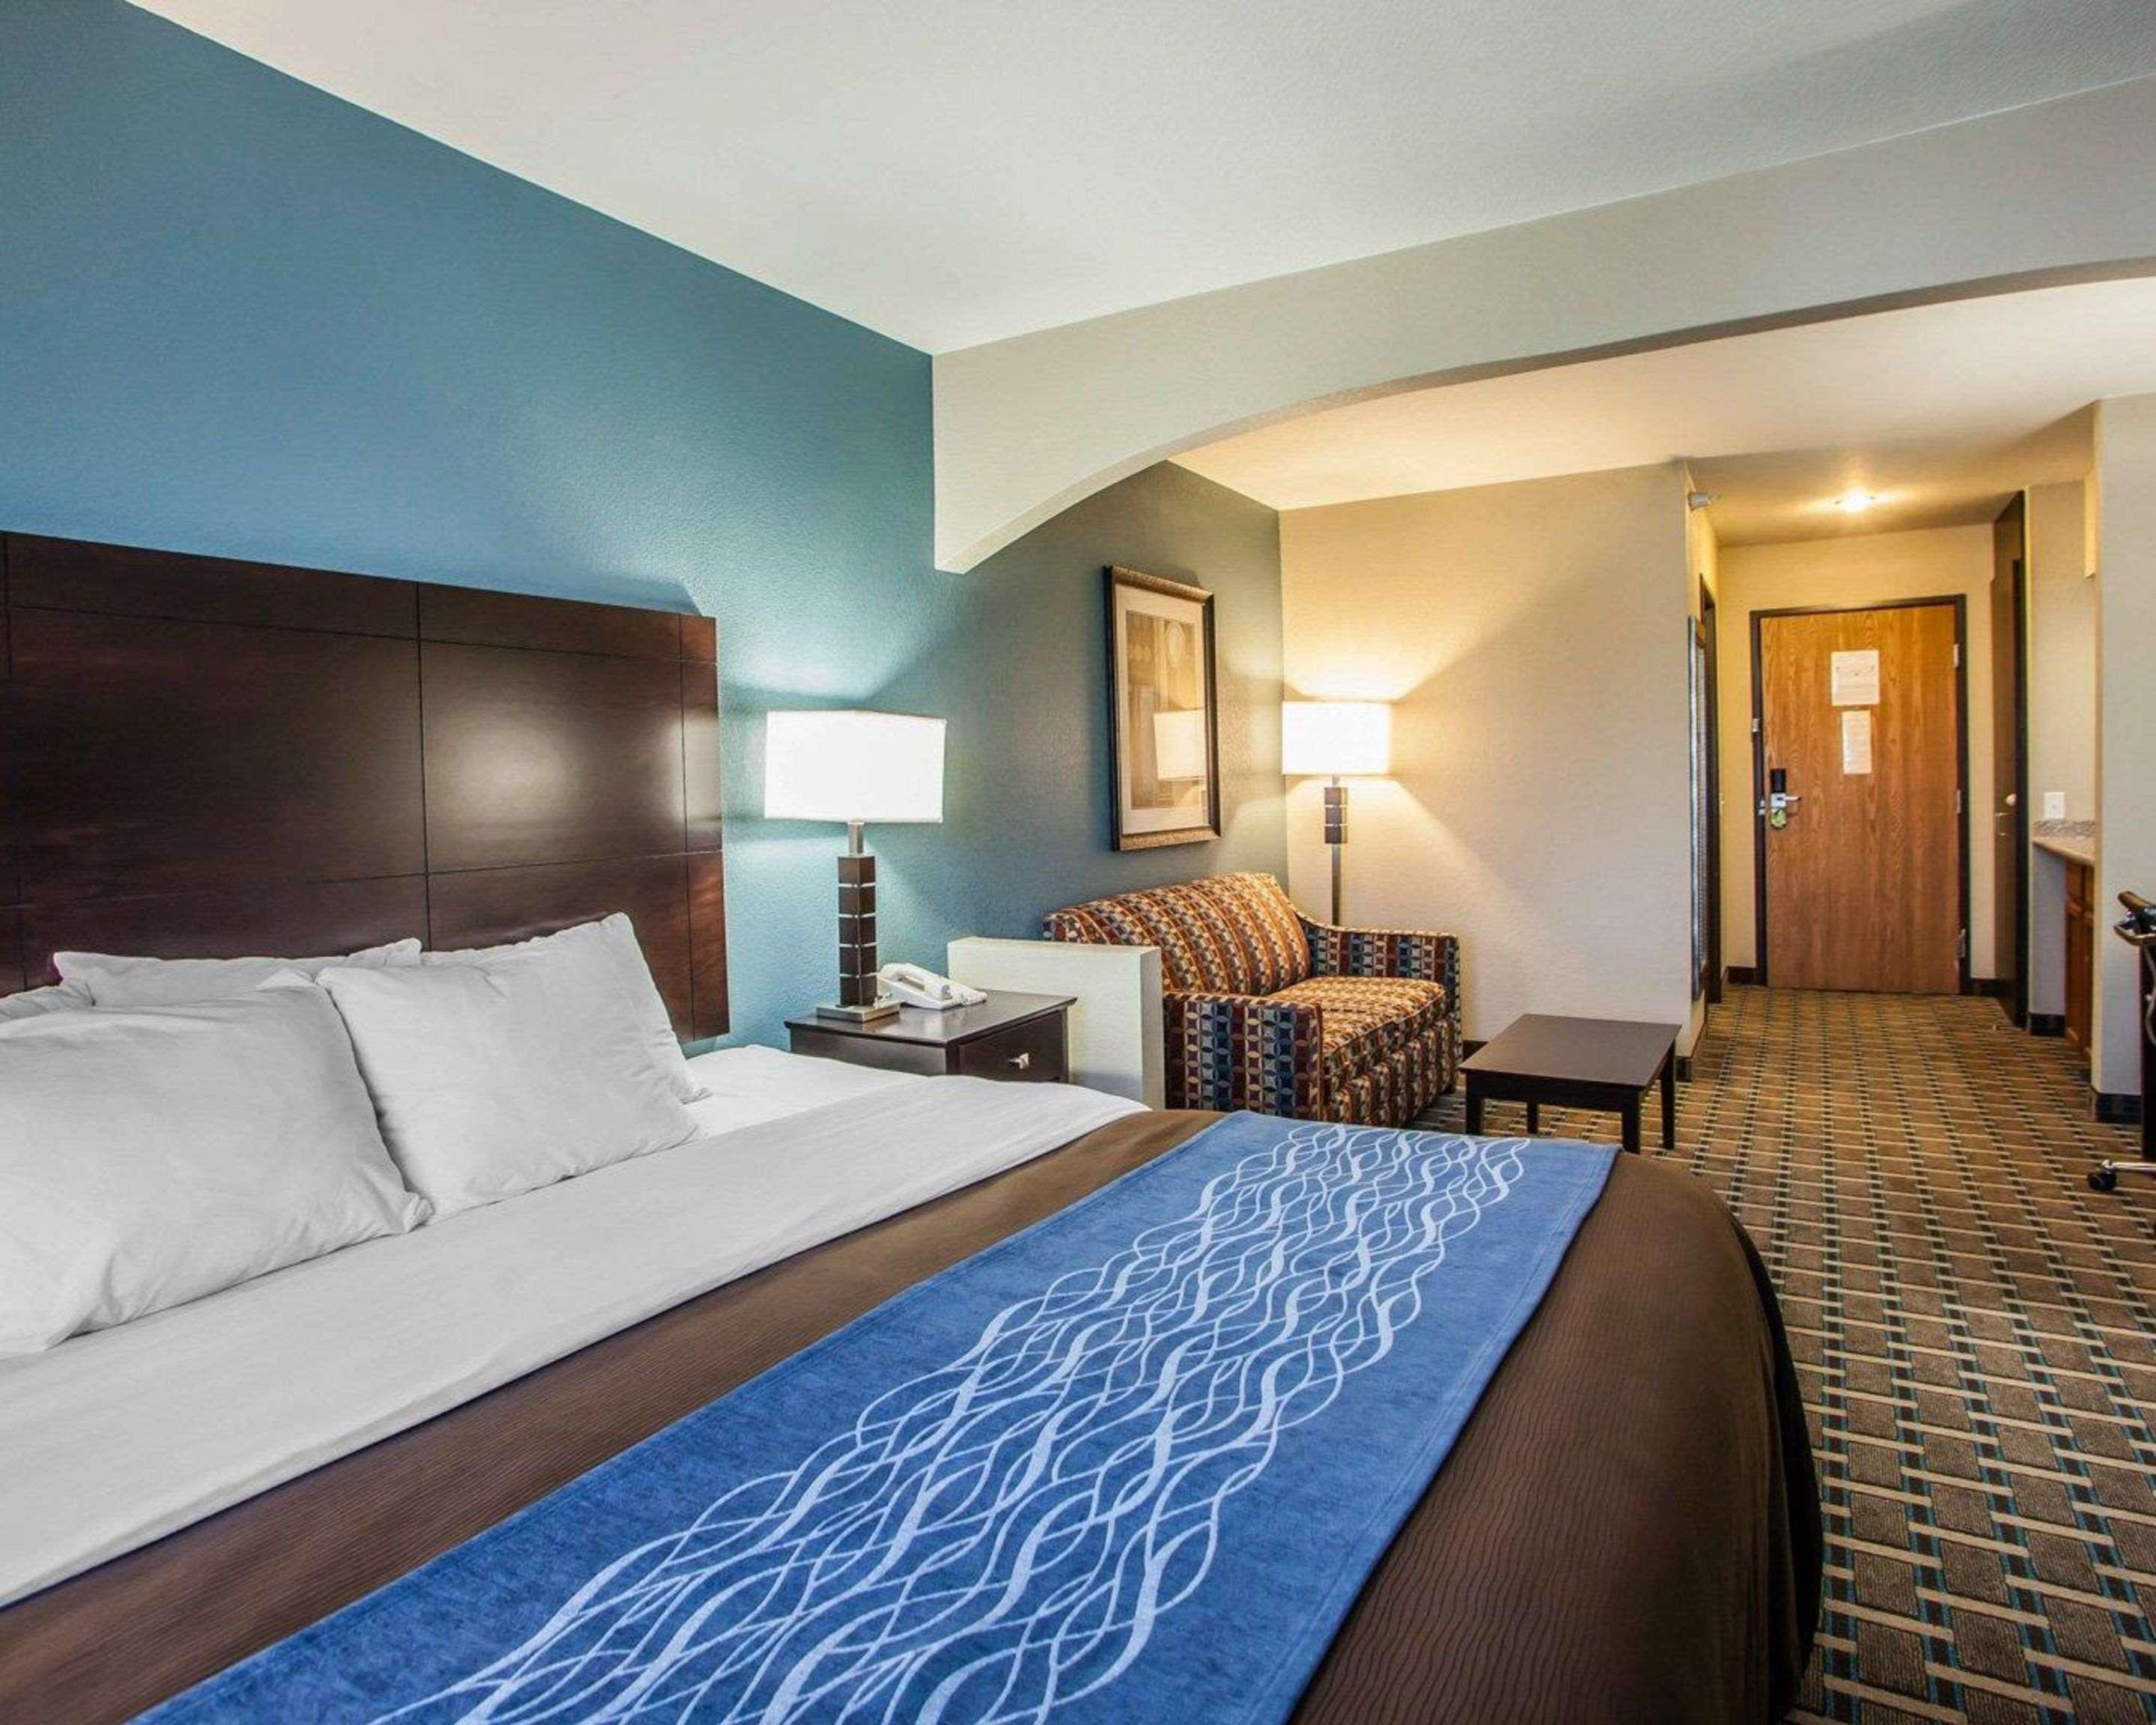 Comfort Inn Lees Summit @ Hwy 50 & Hwy 291 in Lee's Summit, the United  States from $80: Deals, Reviews, Photos | momondo